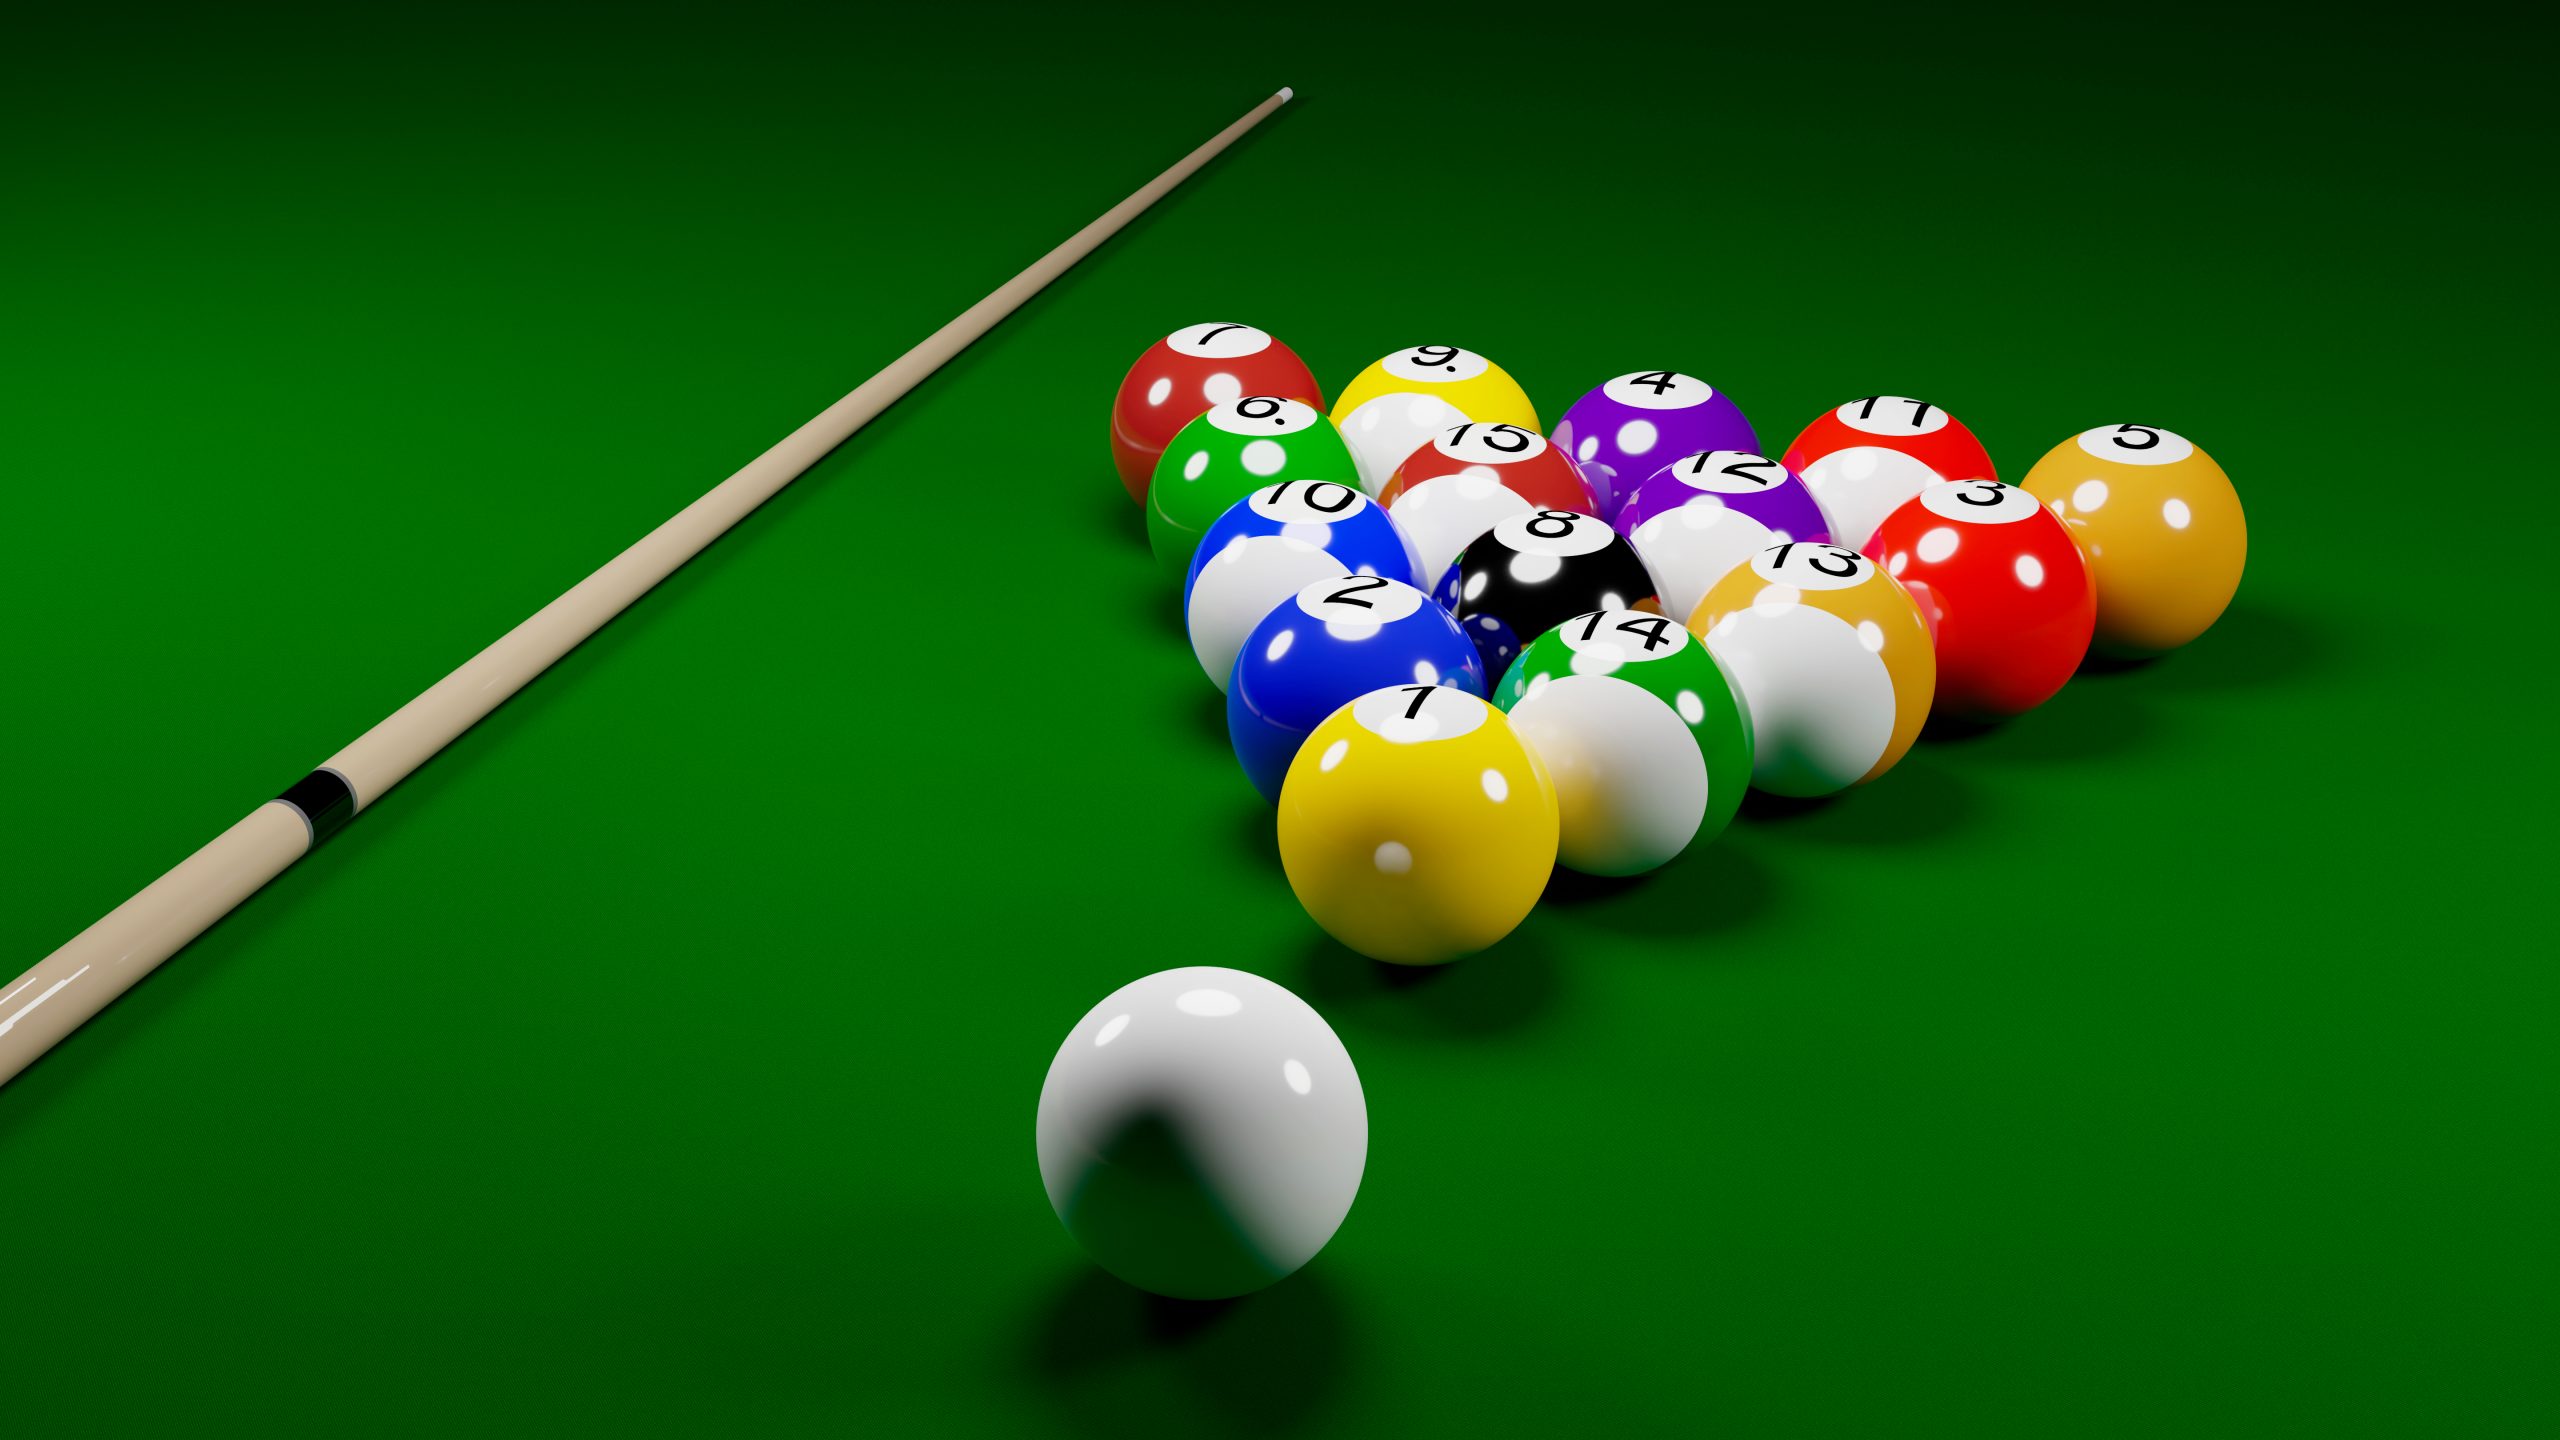 9 ball pool game free online play